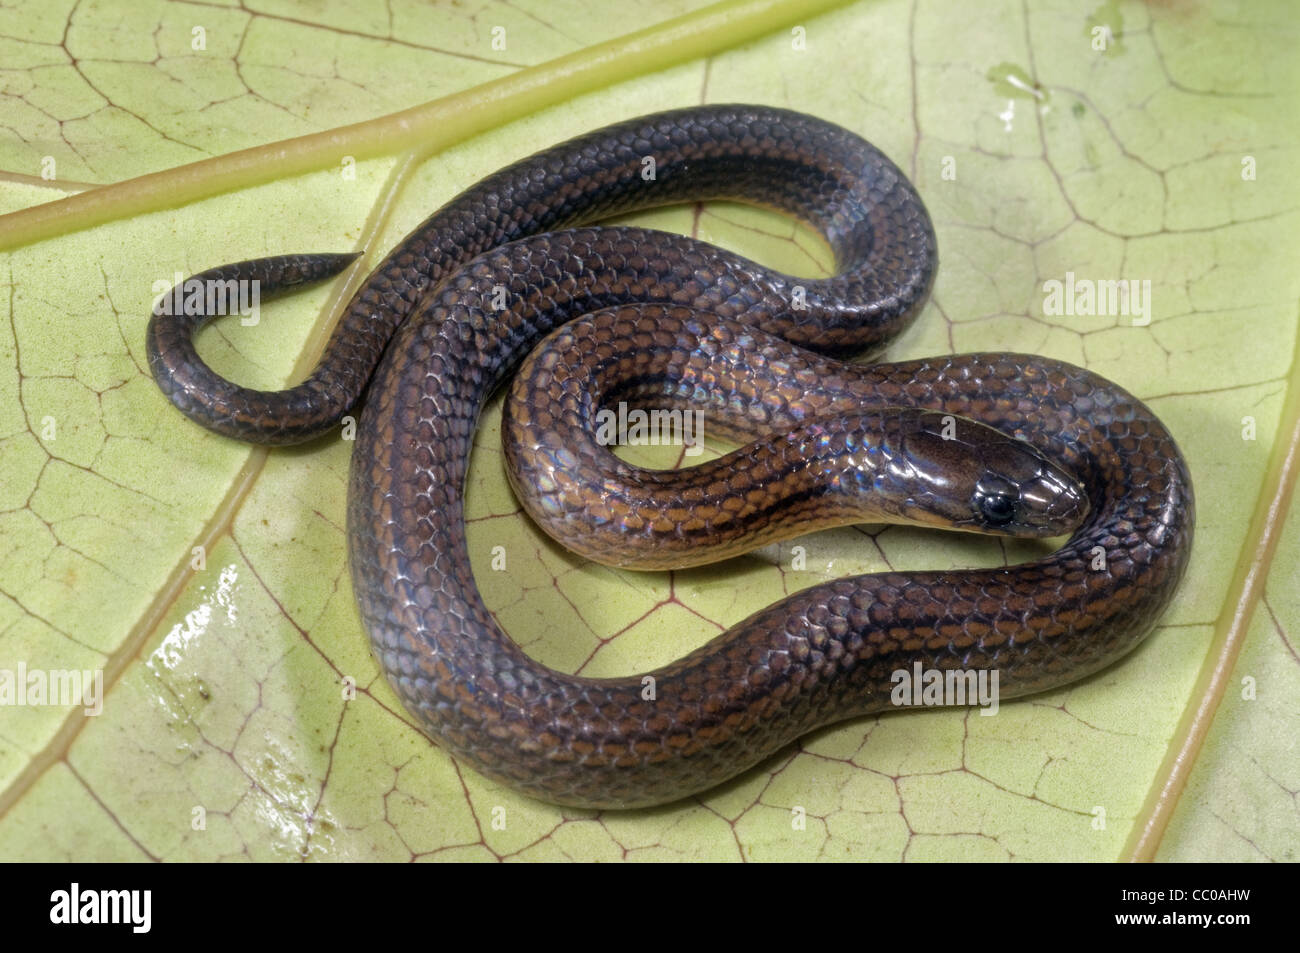 Yellowbelly worm-eating snake (Trachischium tenuiceps) is a species of colubrid snake. Northeast India Stock Photo